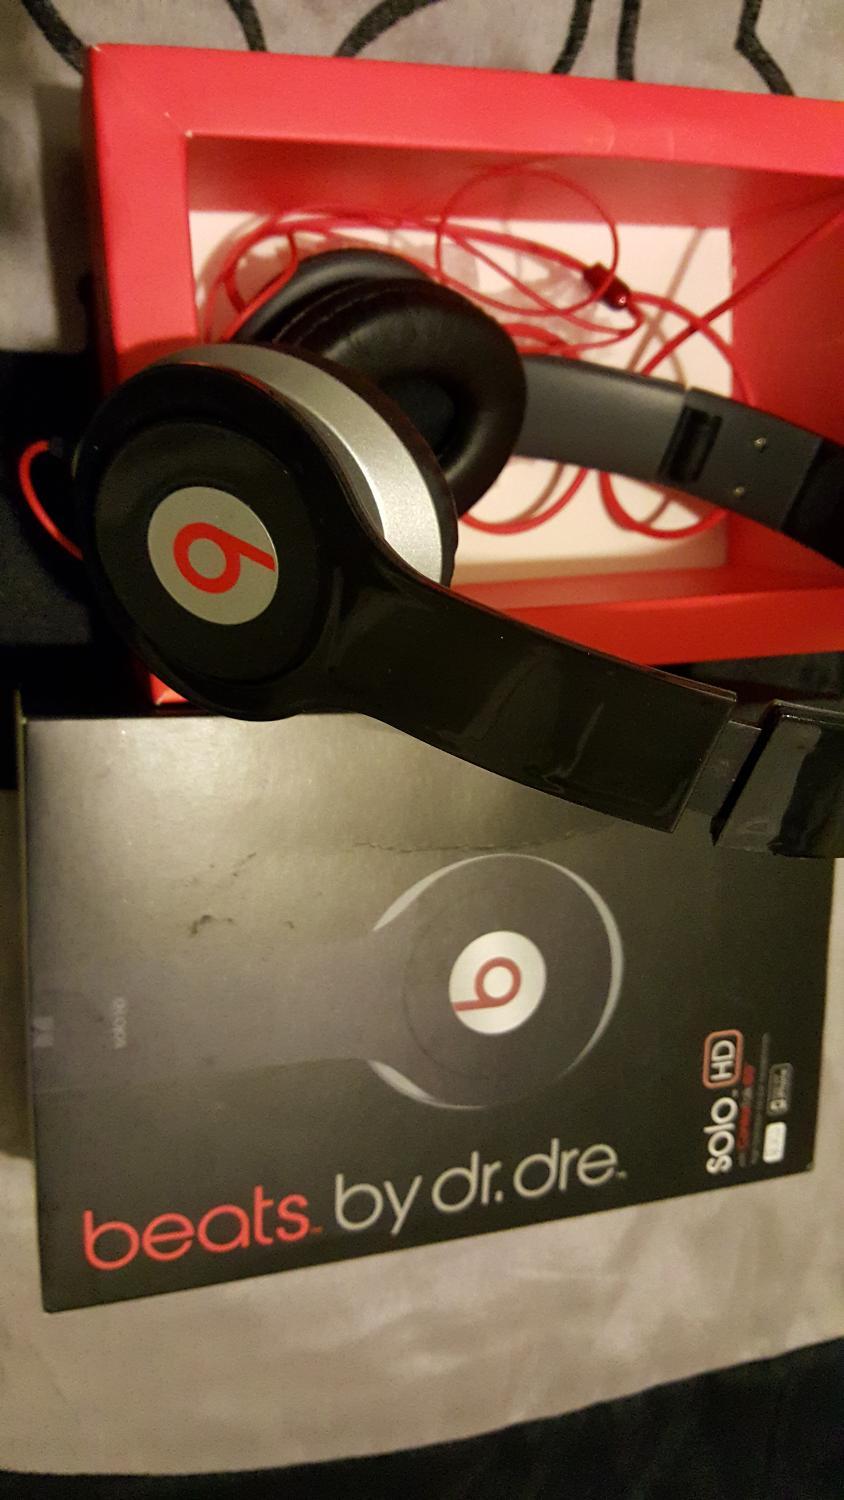 Fake Beats Logo - Best Fake Beats By Dr.dre for sale in Arlington, Texas for 2019